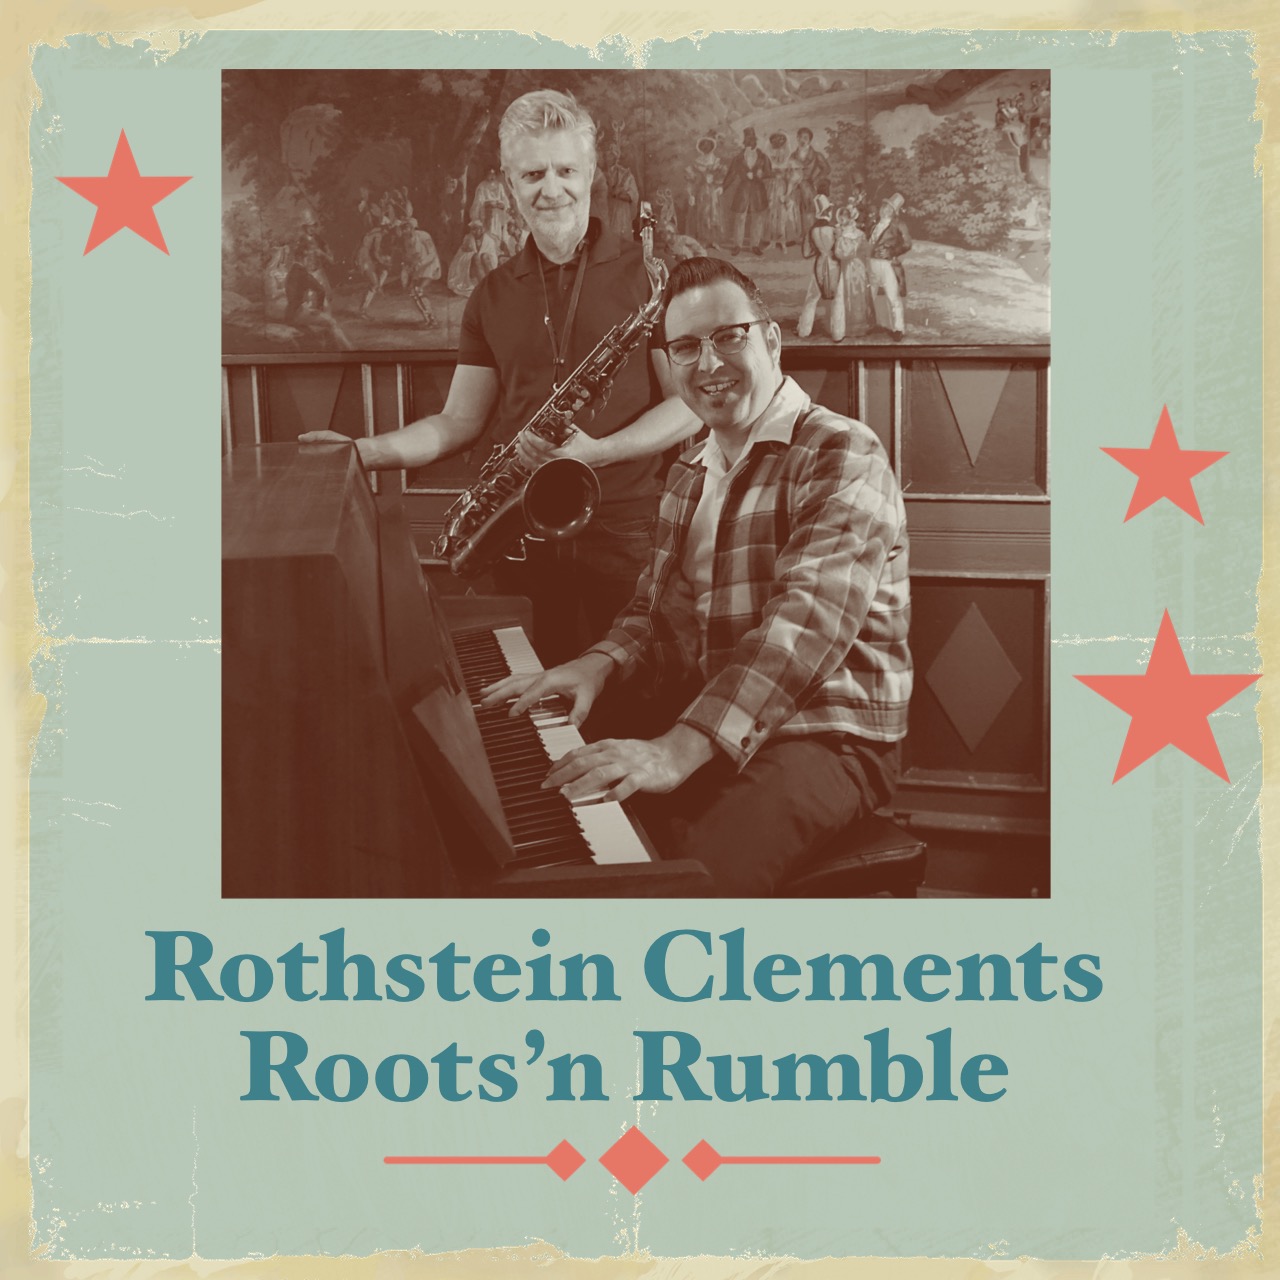 Rothstein/Clements 
Roots'n'Rumble